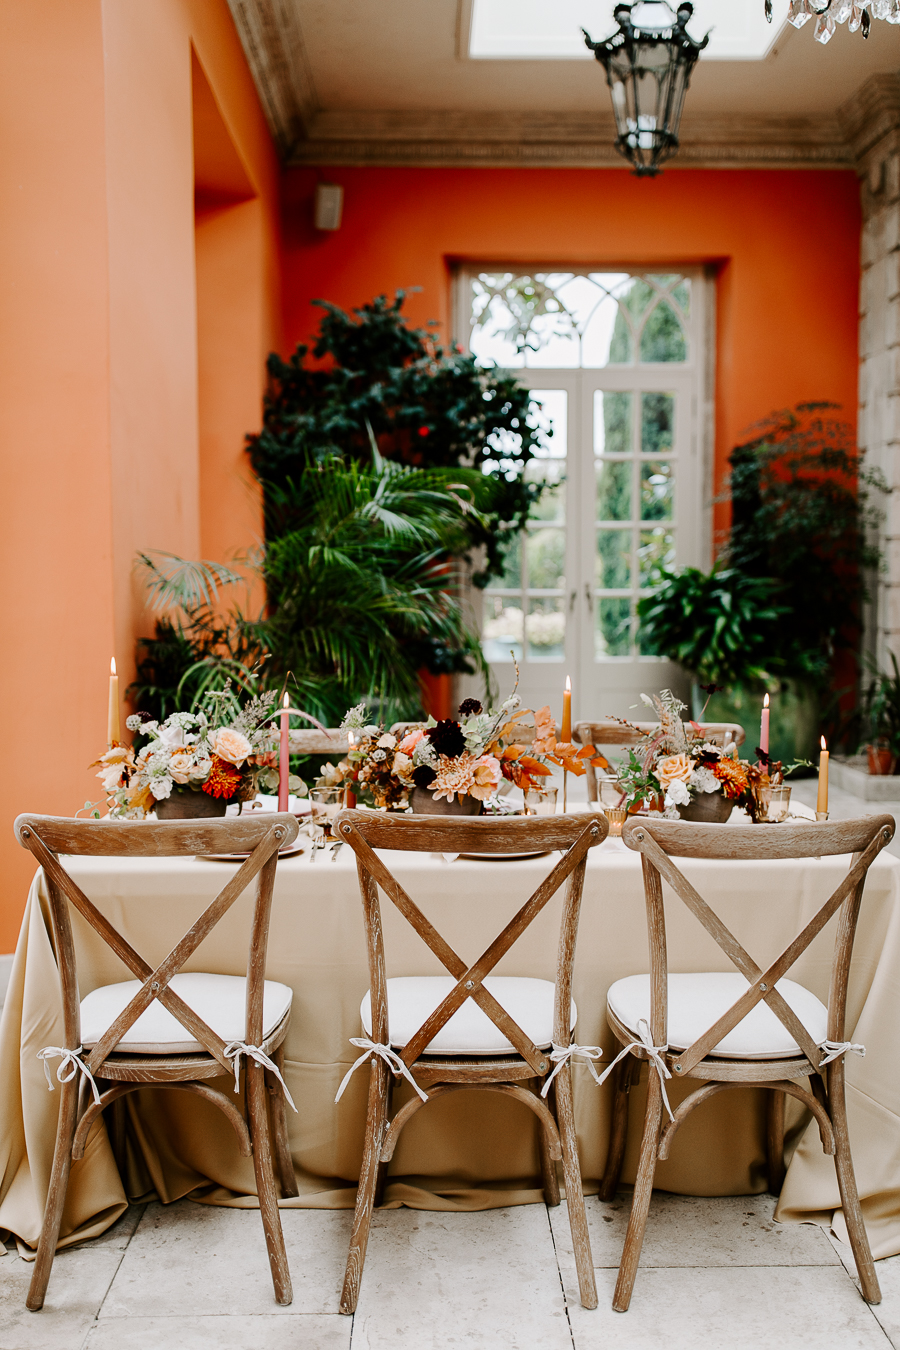 A magical wiltshire wedding venue - the Lost Orangery with Sam Cook Photography (35)